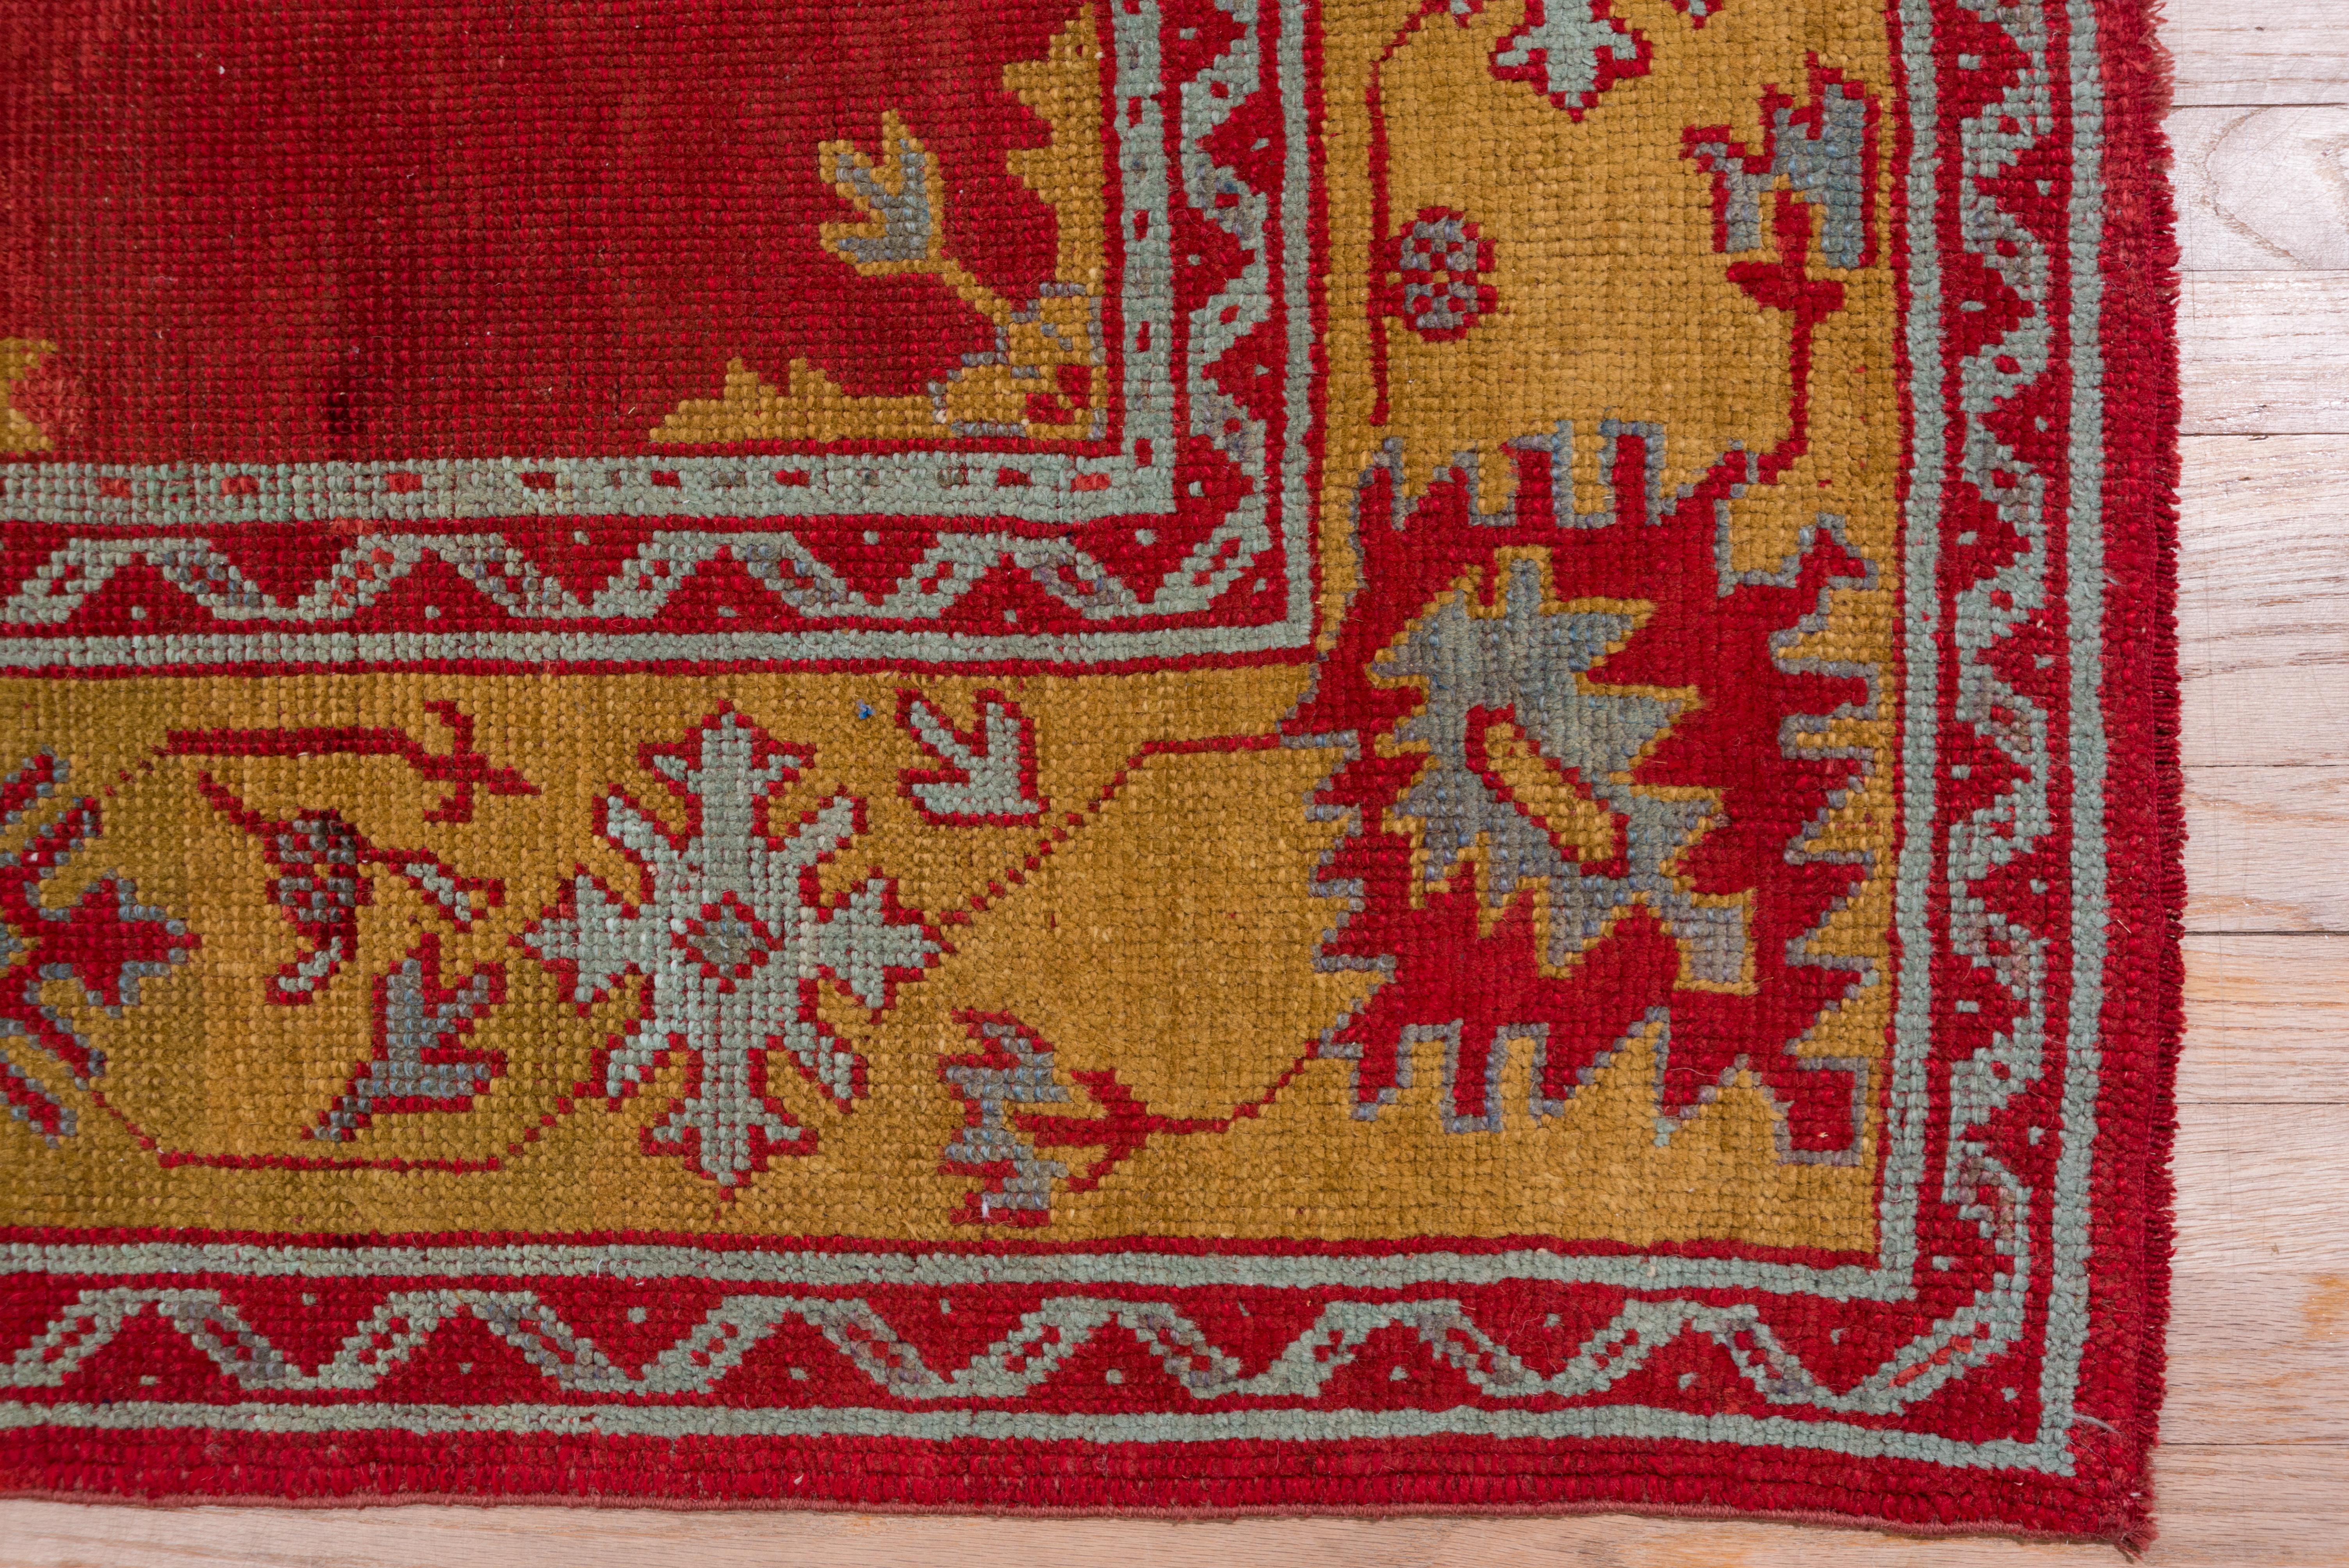 Wool Antique Turkish Red Oushak Carpet, Yellow Borders, circa 1910s For Sale